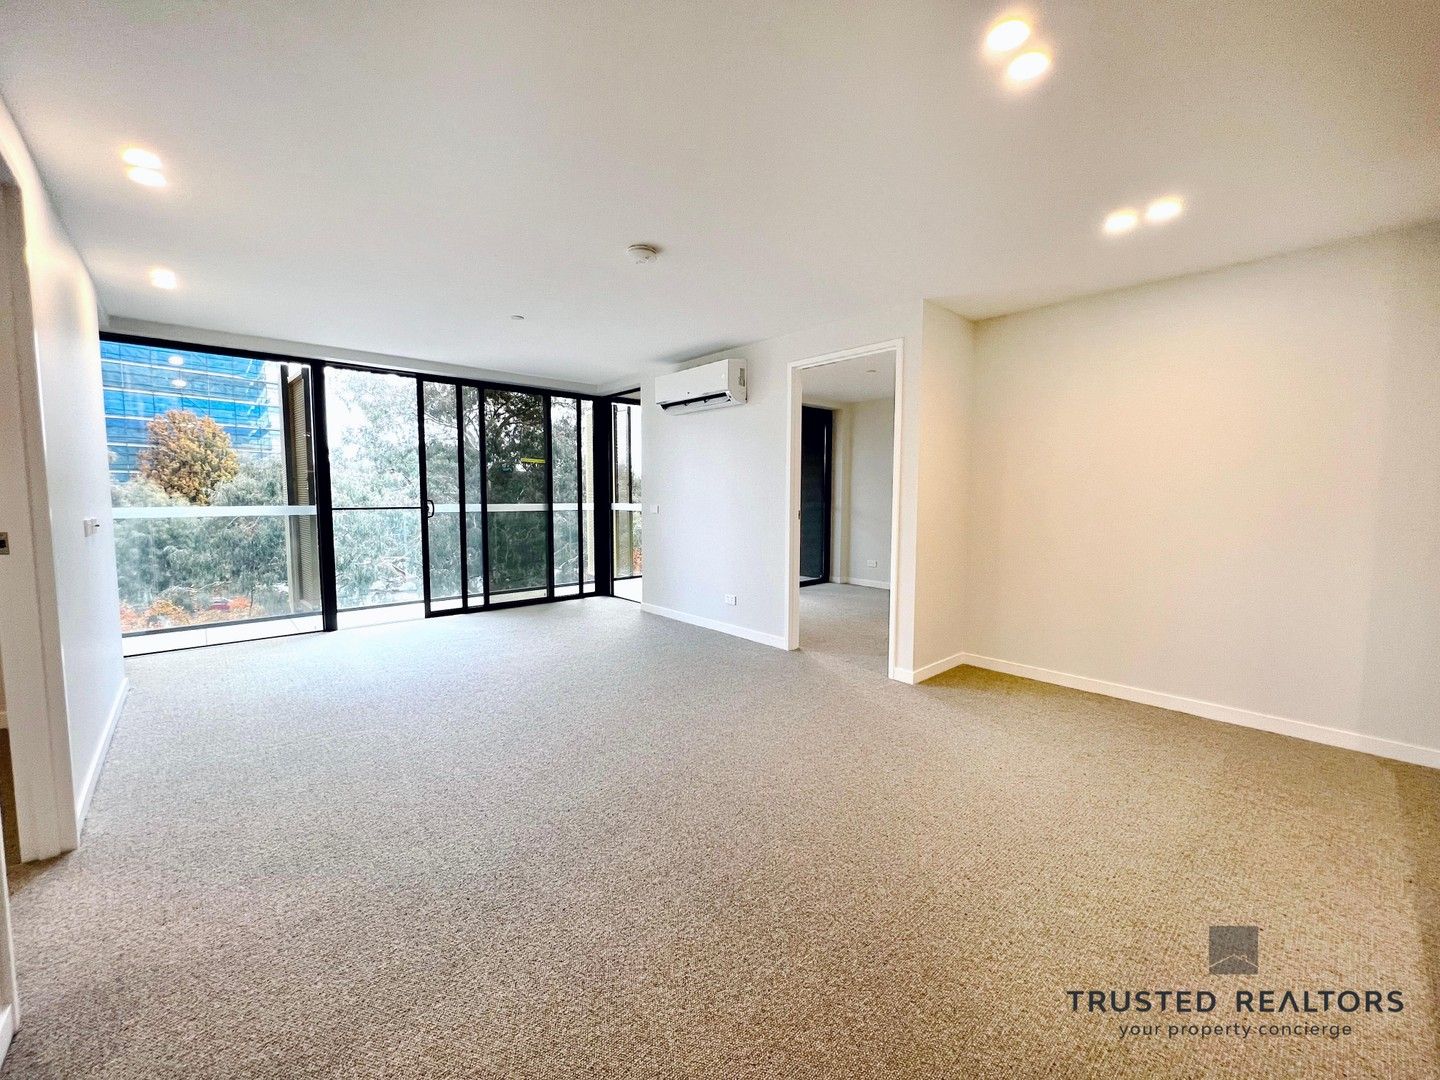 3 bedrooms Apartment / Unit / Flat in A305/352 Northbourne Avenue DICKSON ACT, 2602